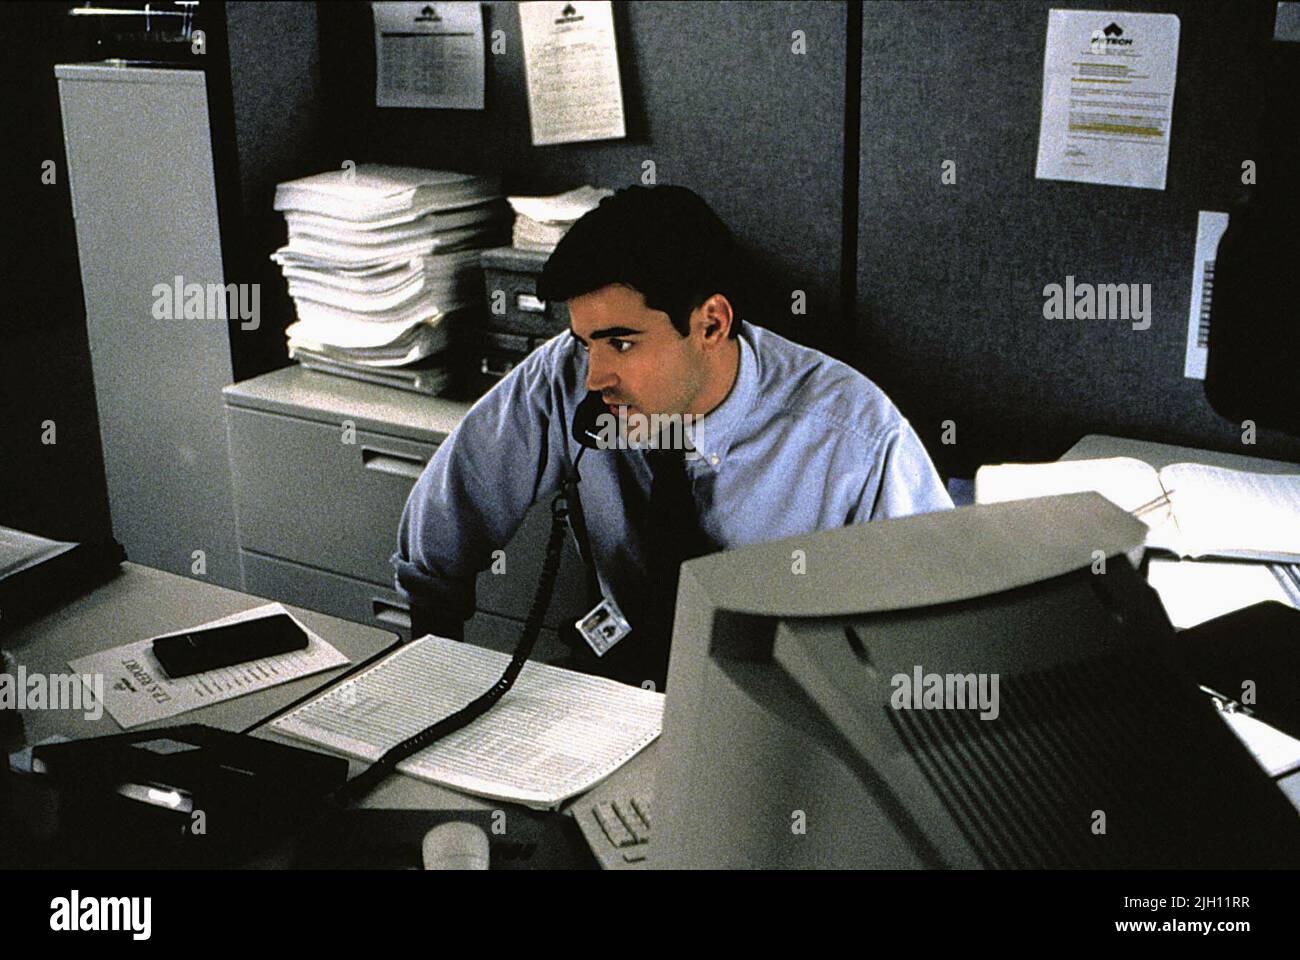  Office Space 1999